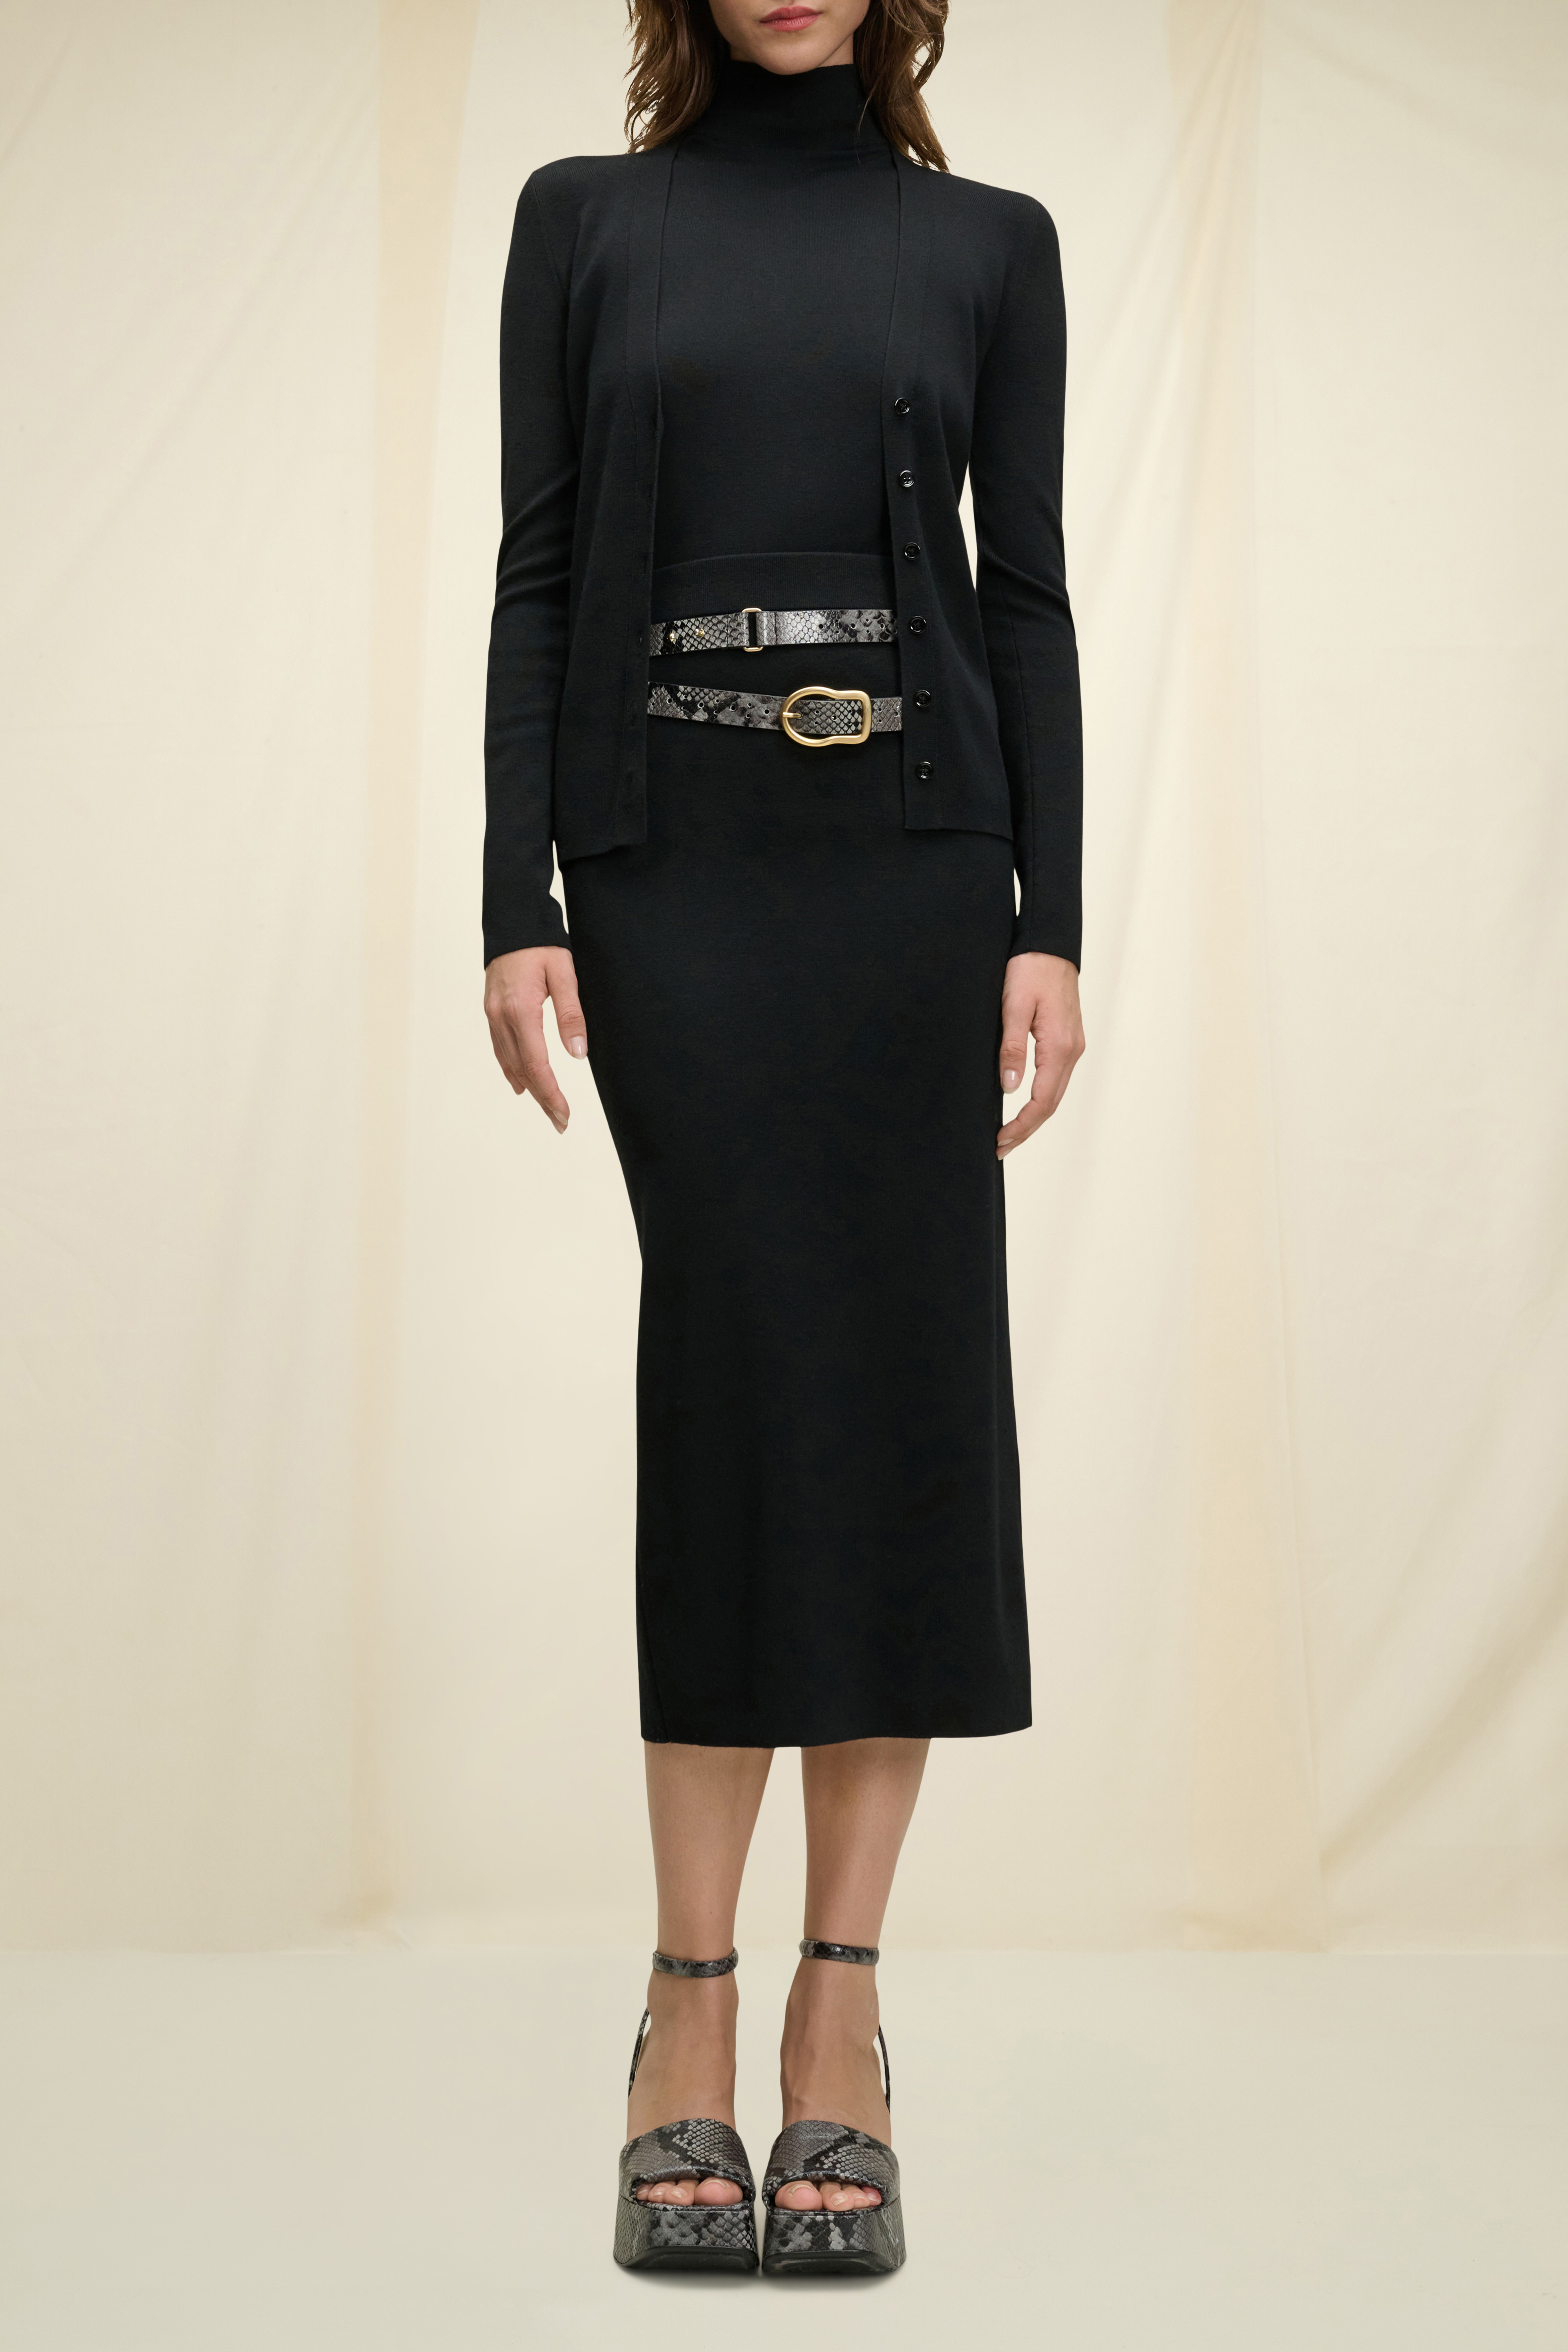 Dorothee Schumacher Midi skirt with a button